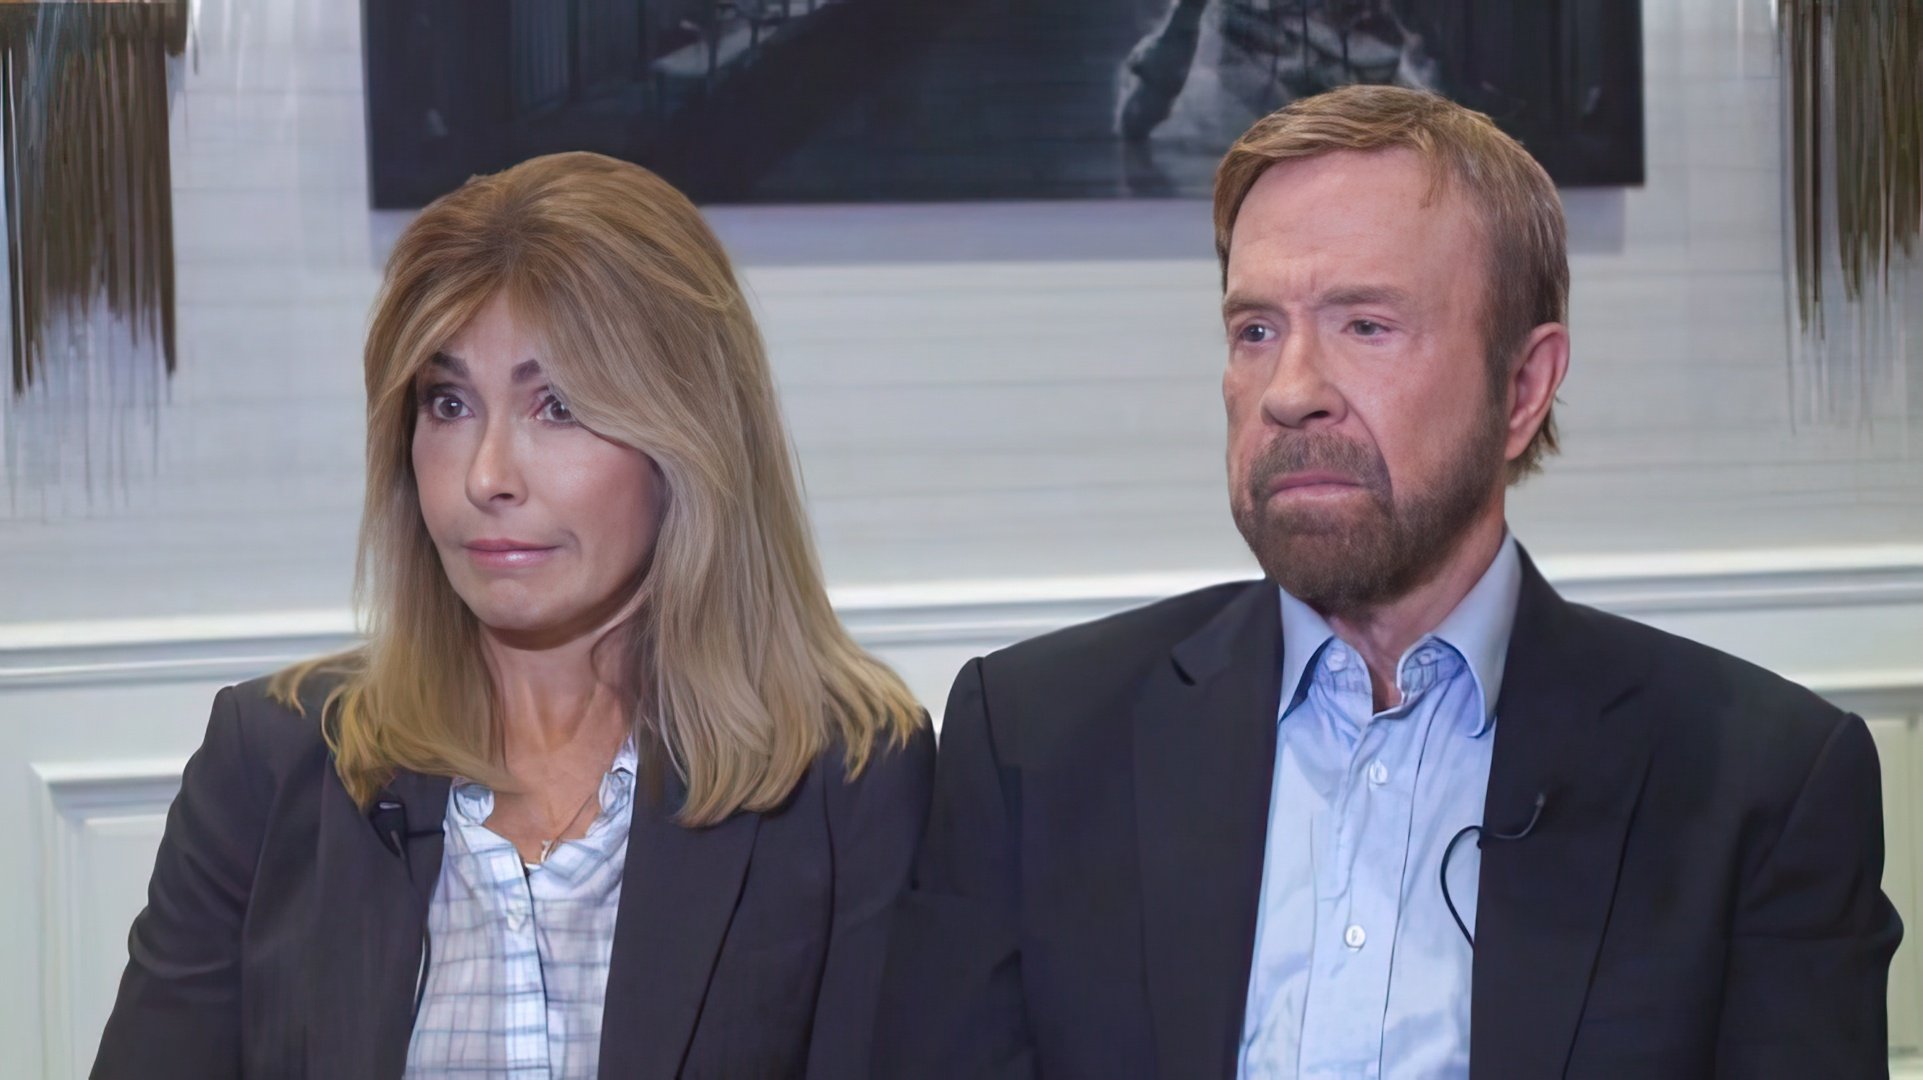 Chuck Norris sued the manufacturer of MRI chemicals